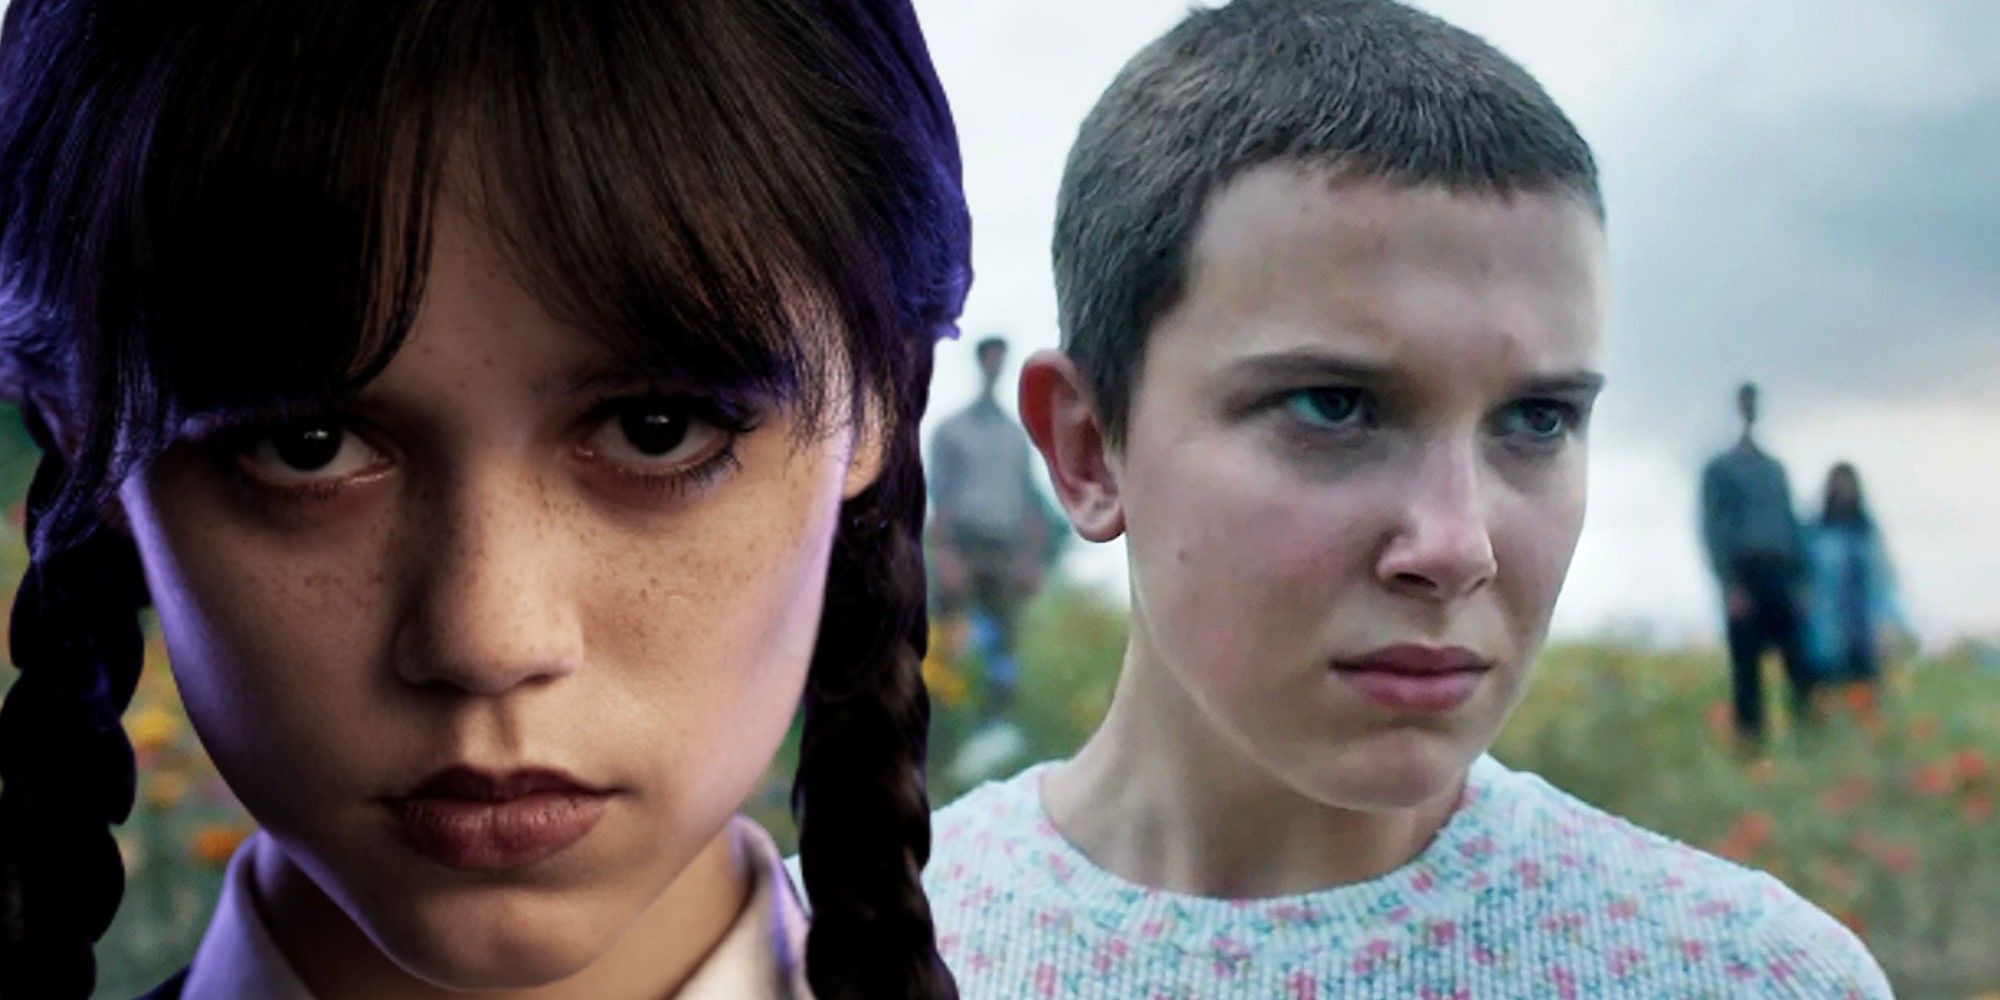 Jenna Ortega as Wednesday and Millie Bobby Brown as Eleven